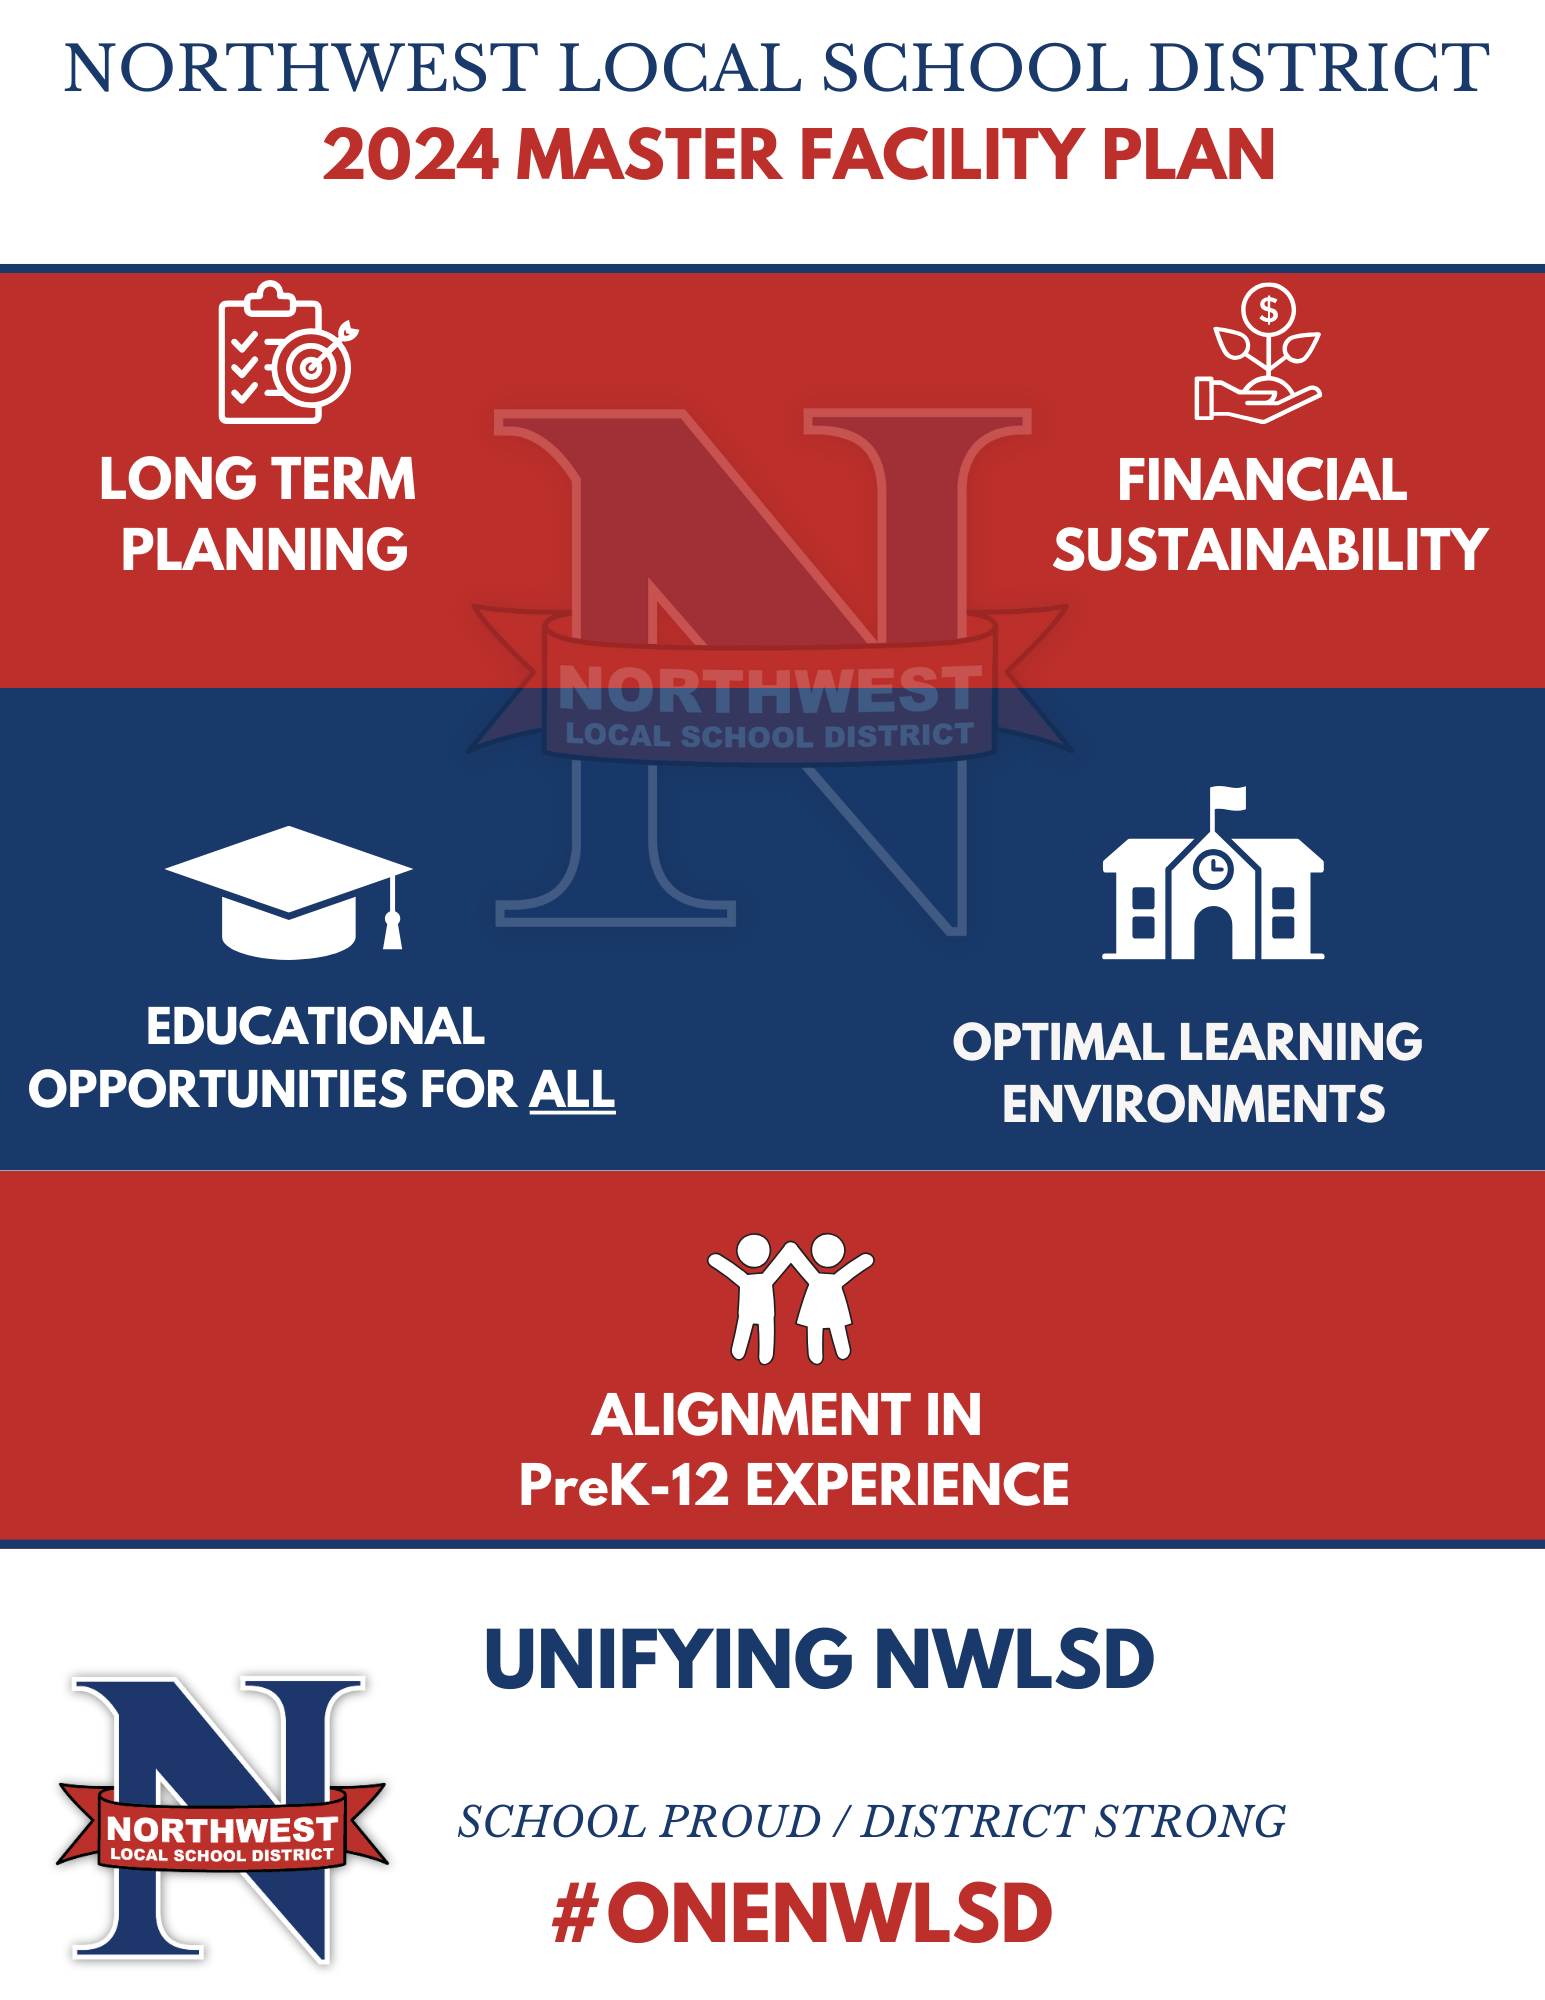 Northwest Local School District  Master Facility Plan Long Term Planning  Financial Sustainability Educational Opportunities For All Optimal Learning Environments  Alignment in K-12 Experience  Unifying NWLSD School Proud / District Strong #OneNWLSD 